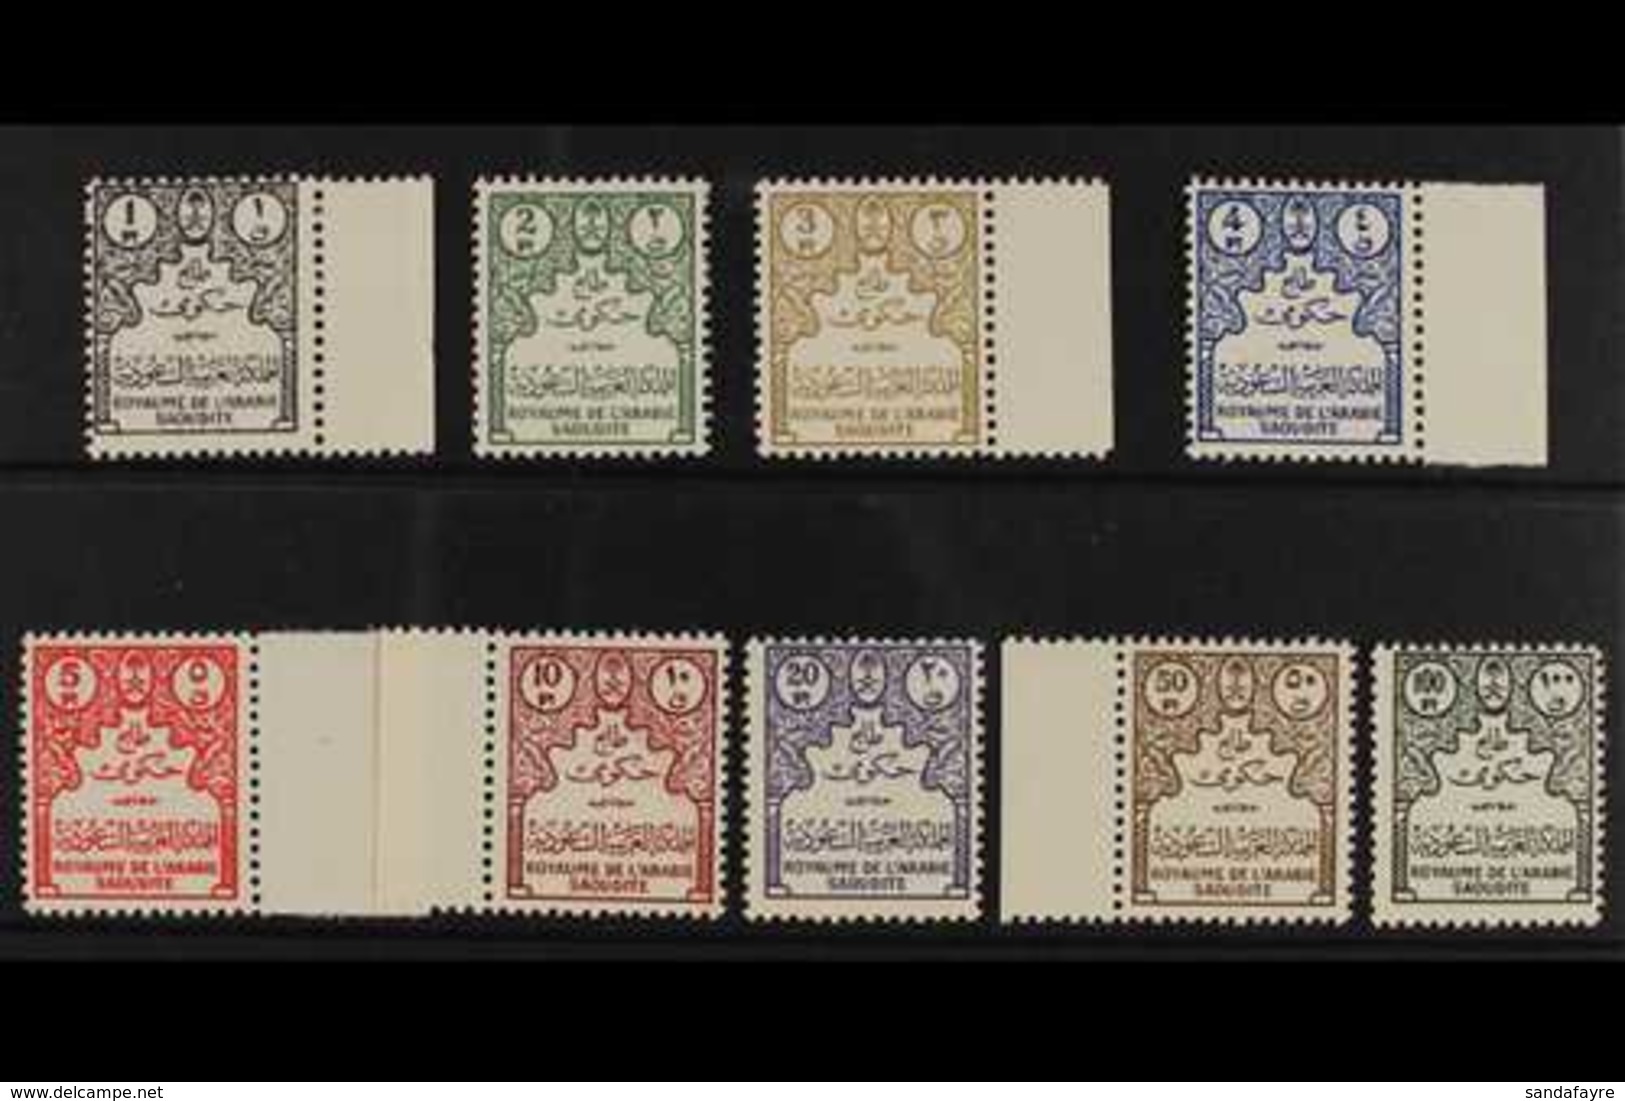 OFFICIALS  1961 Complete Set (many Are Marginal Examples), SG O449/O457, Never Hinged Mint. (9 Stamps) For More Images,  - Saoedi-Arabië